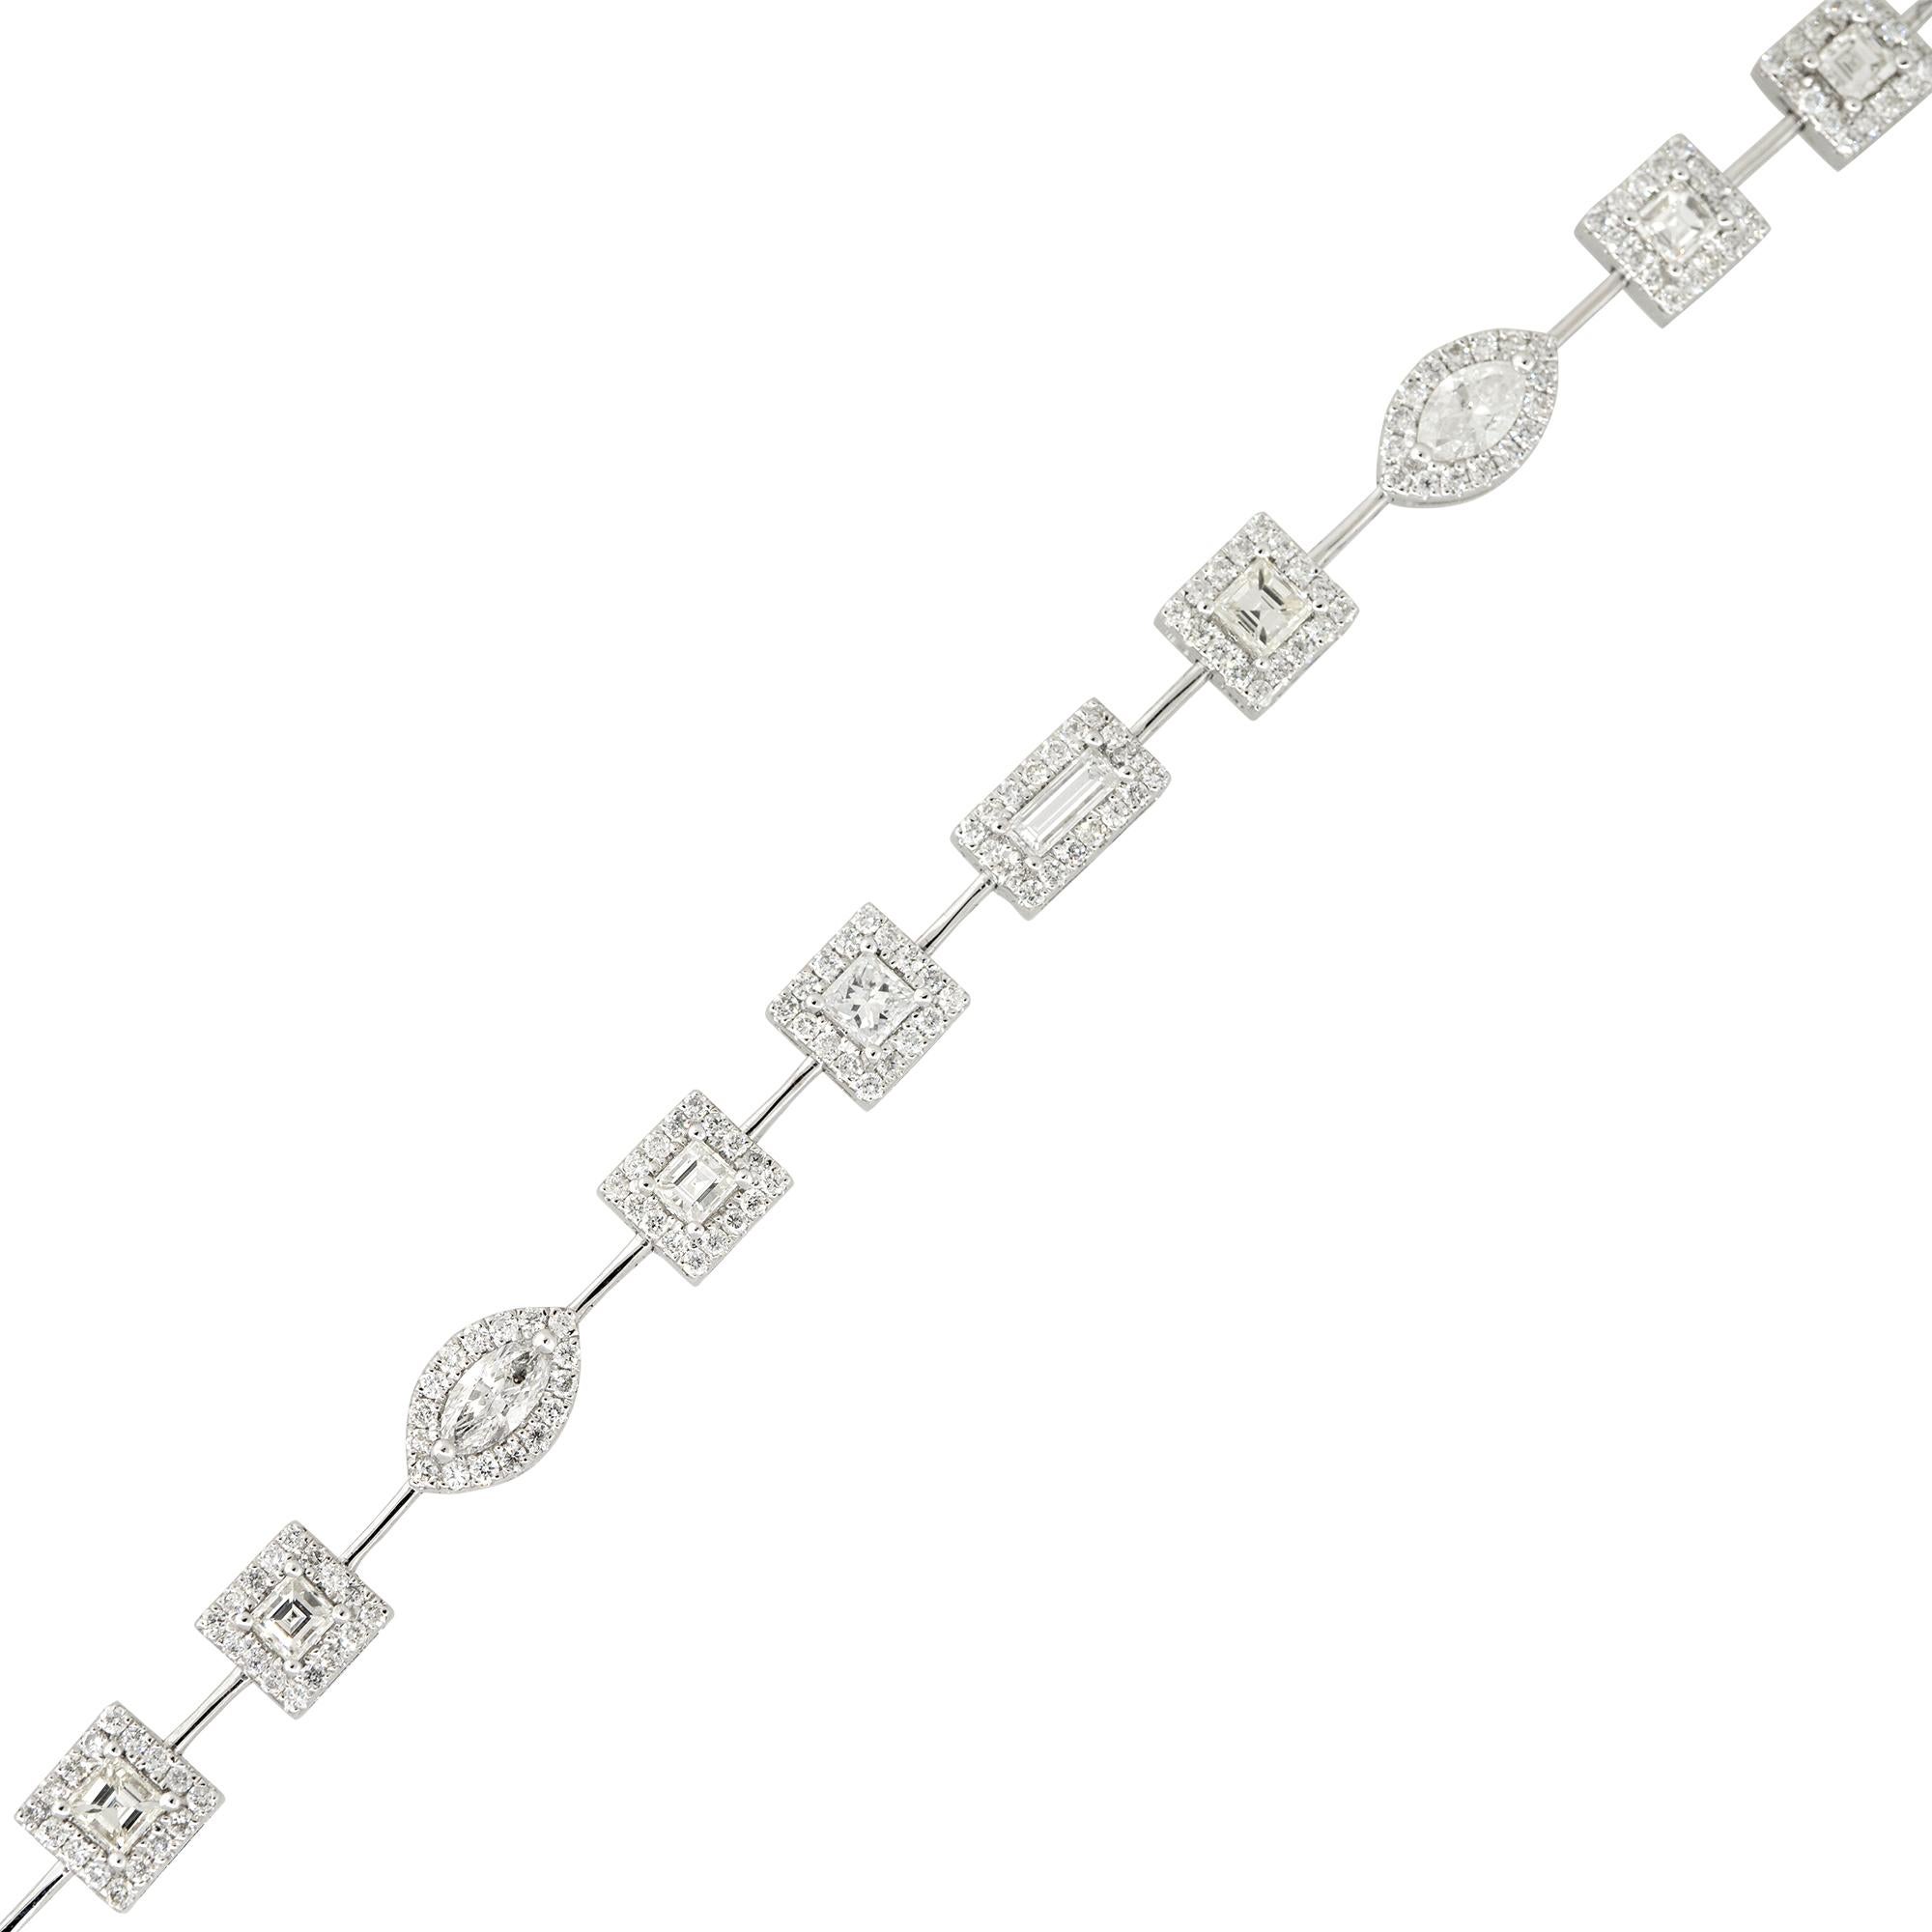 18k White Gold 3.75ctw Multi-Shape Diamond Halo Bracelet
Material: 18k White Gold
Diamond Details: Approximately 3.75ctw of Marquise, Asscher, Radiant, Emerald, and Baguette cut Diamonds. Each larger stone has a halo with smaller diamonds. There are